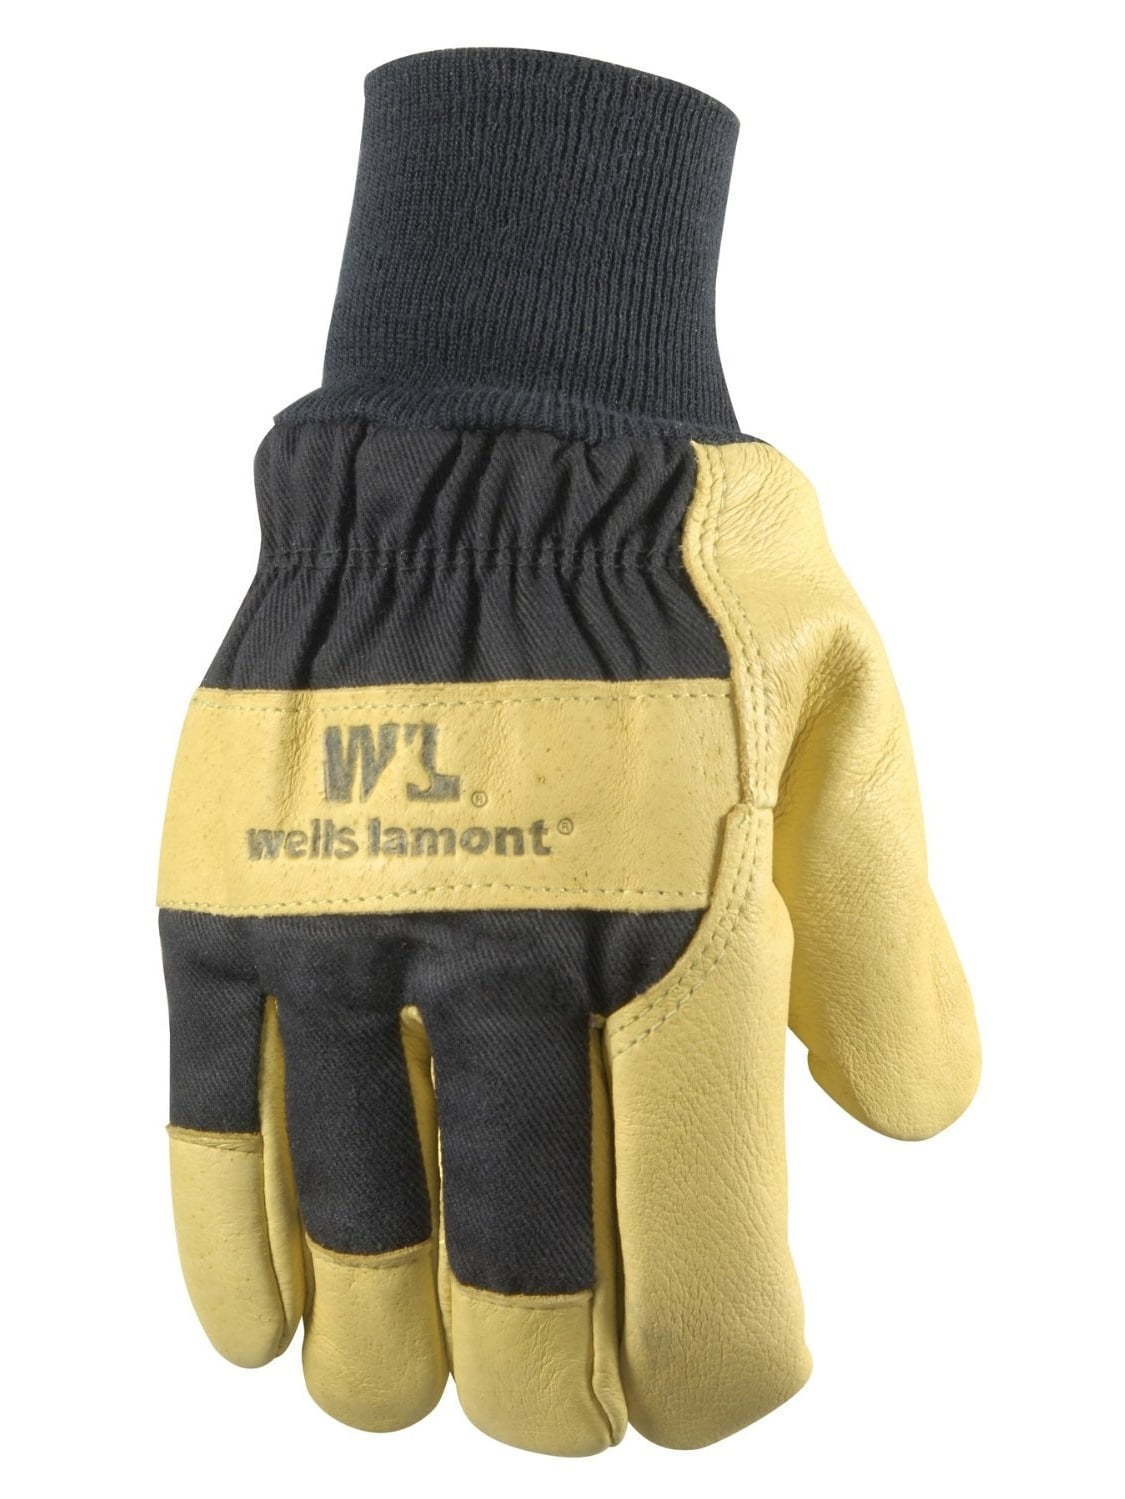 Winter Leather Work Gloves Sherpa Fleece Lined In Mens  Small,Med,Large,XL,XXL (XXL)